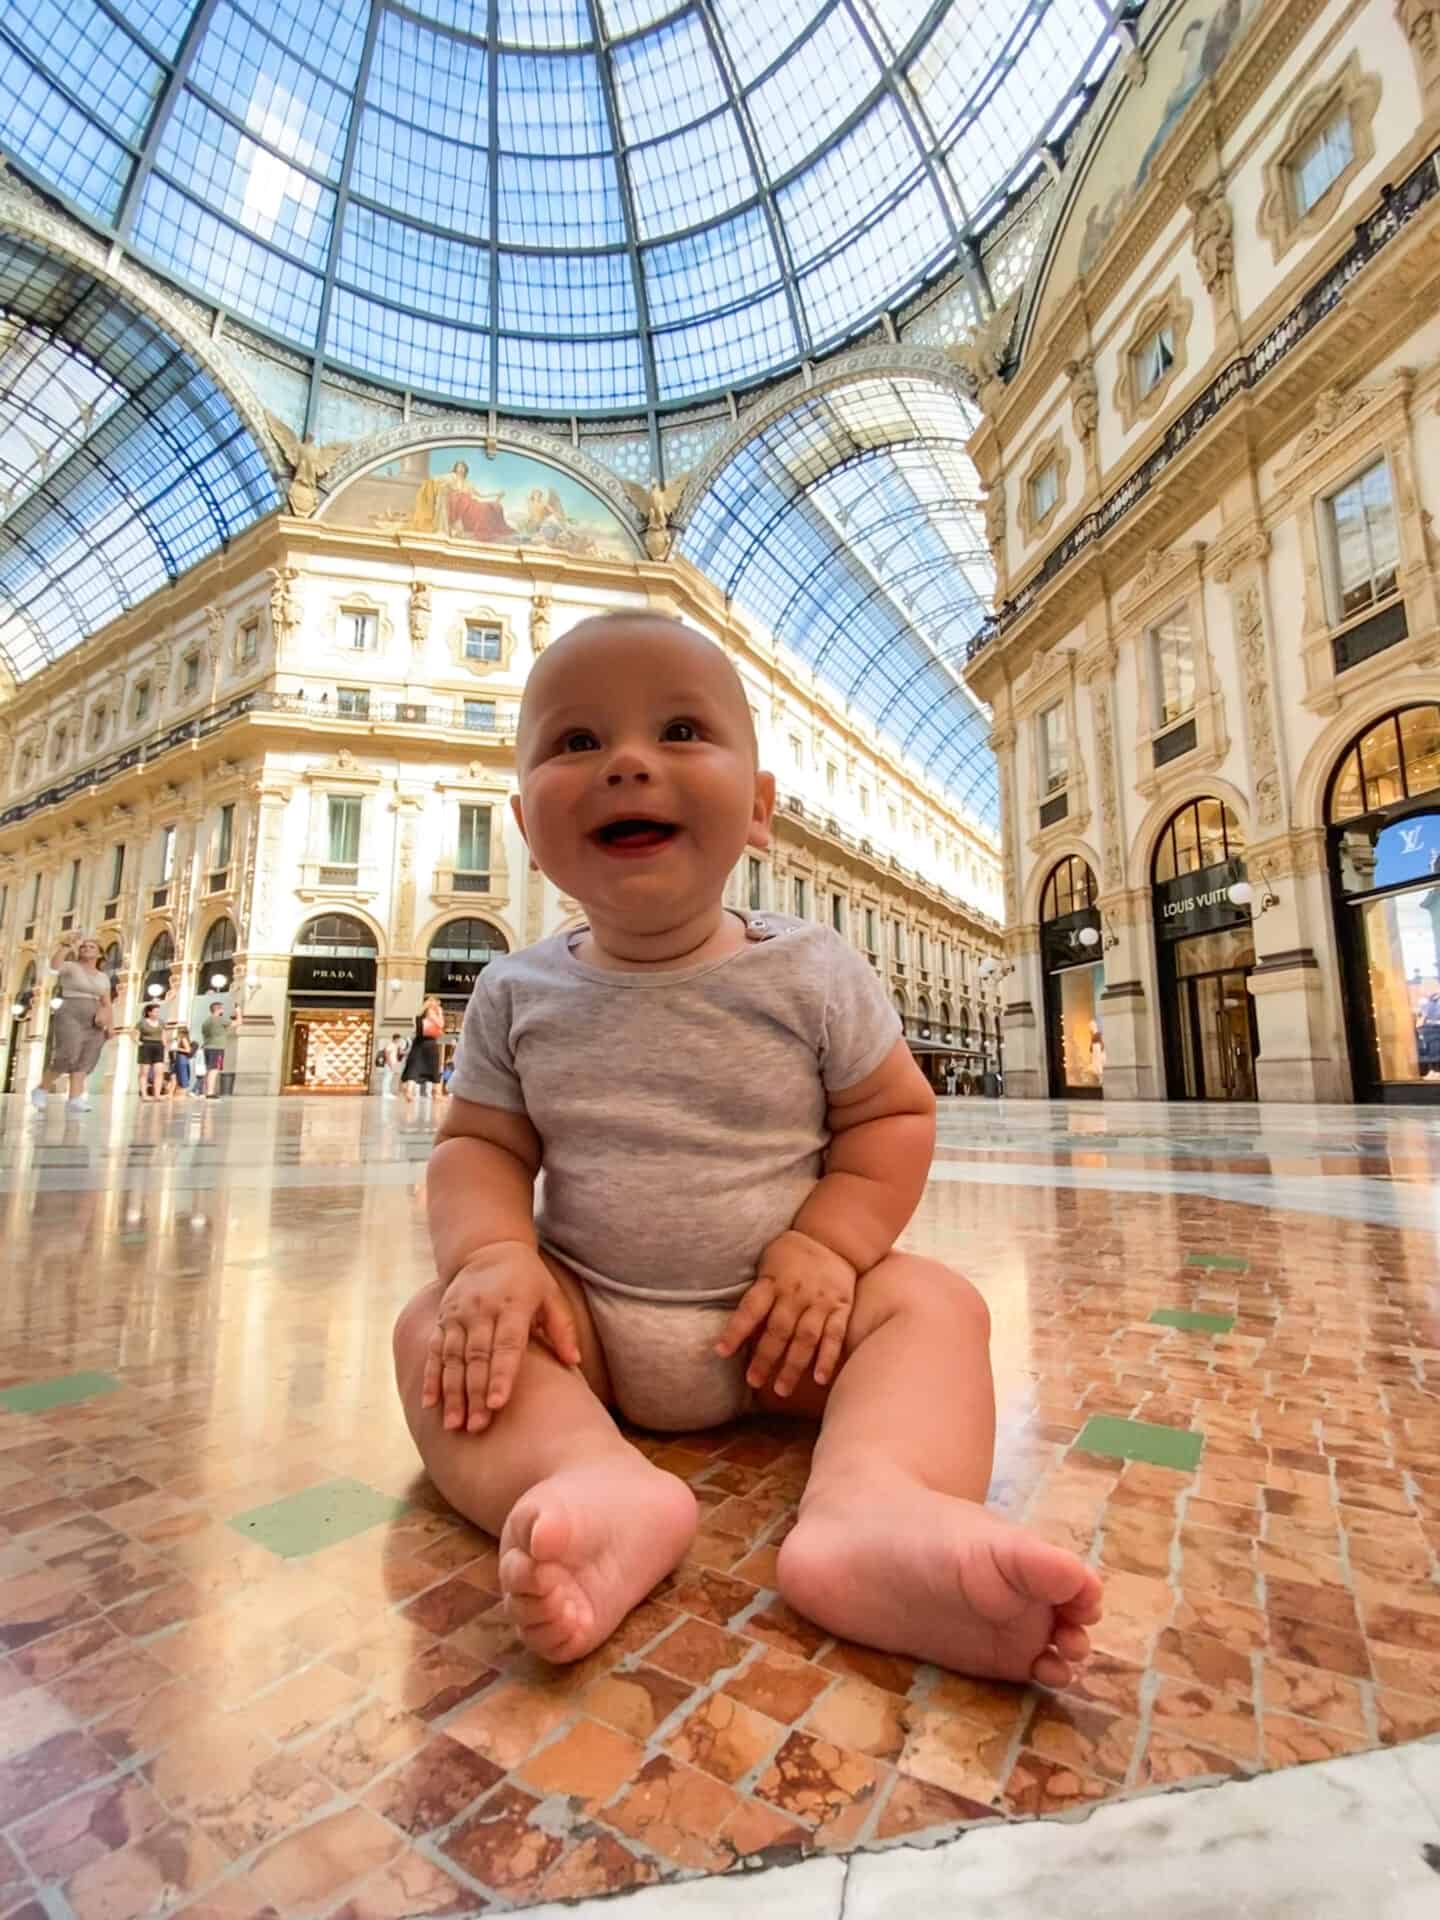 Adorable 6 month old baby smiling on the marble floor at Galleria early in the morning in milan